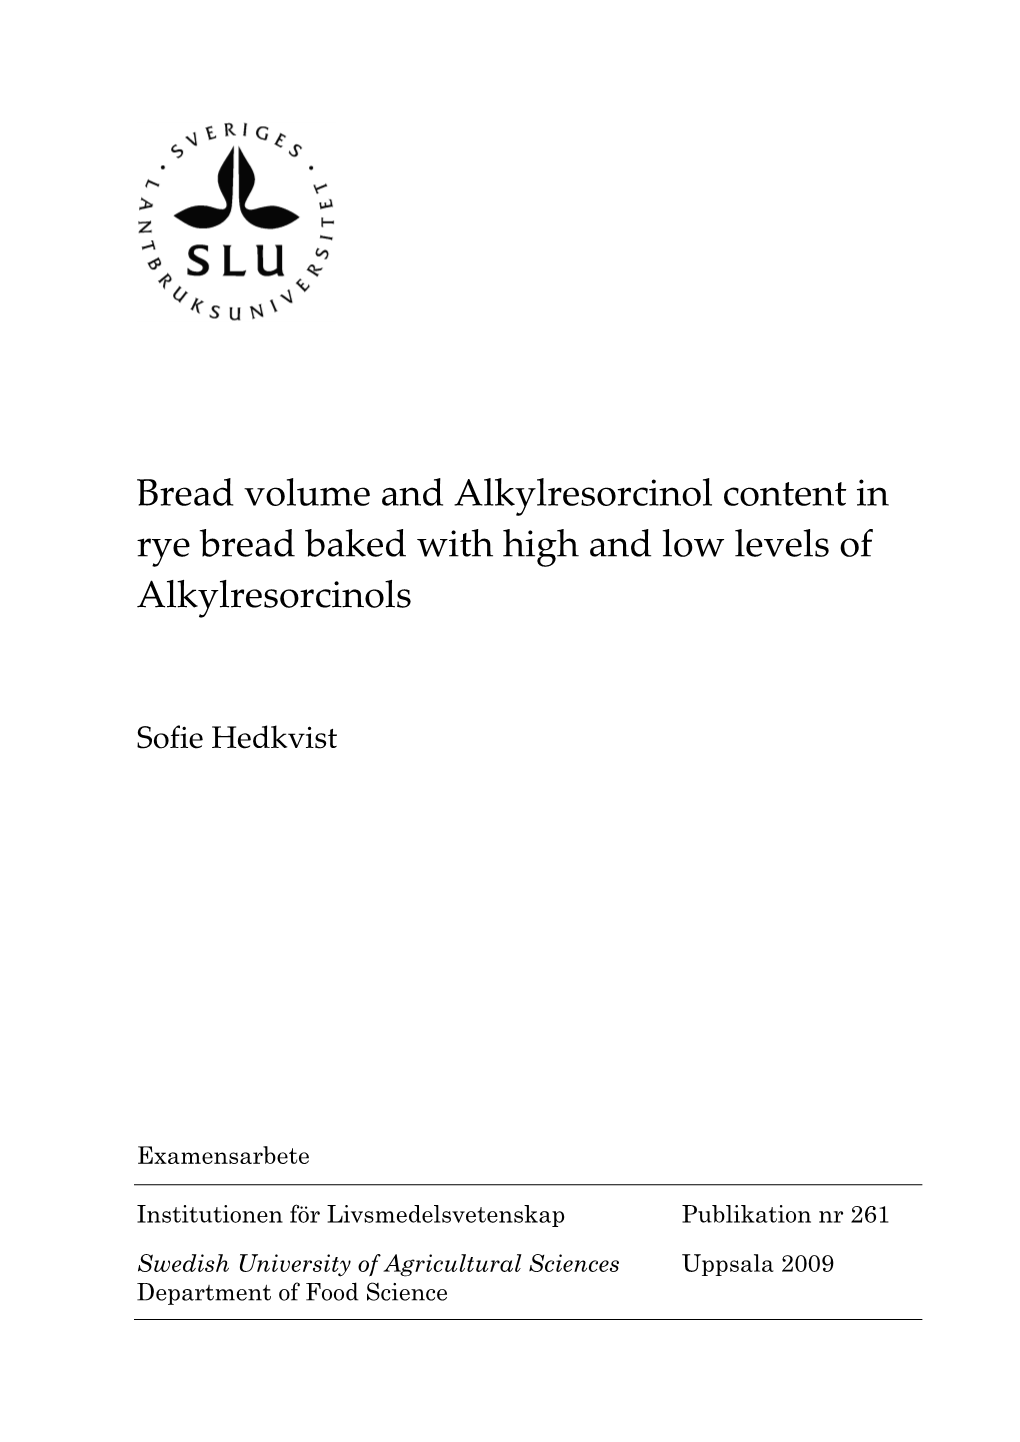 Bread Volume and Alkylresorcinol Content in Rye Bread Baked with High and Low Levels of Alkylresorcinols